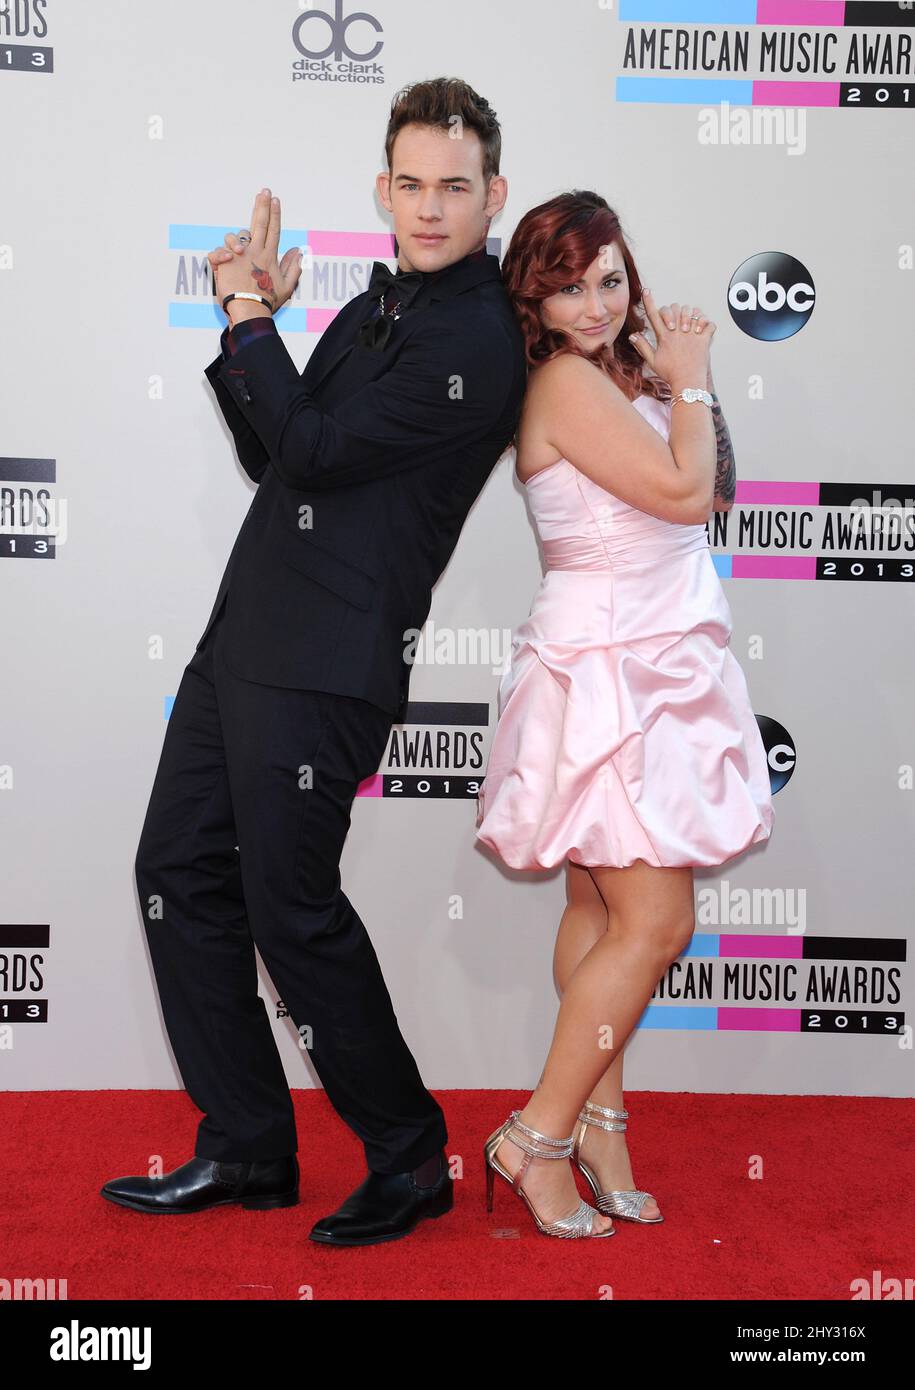 James Durbin attending the 2013 American Music Awards held at Nokia Theatre L.A. Live in Los Angeles, USA. Stock Photo